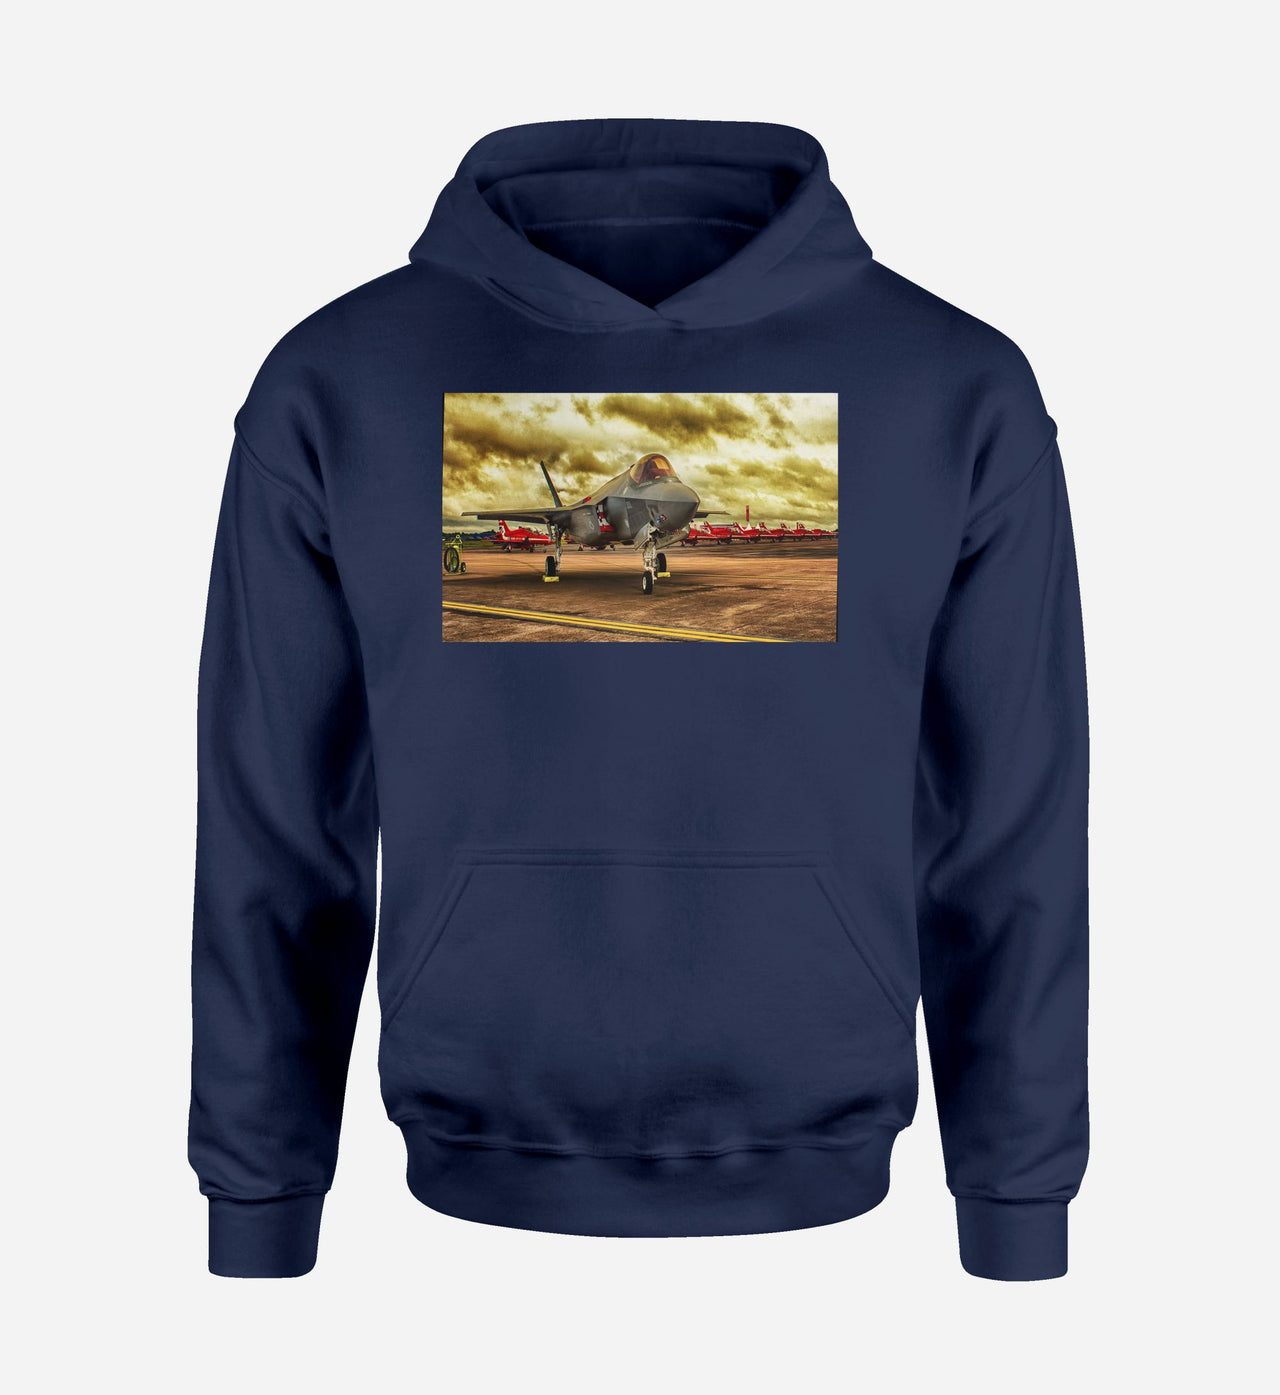 Fighting Falcon F35 at Airbase Designed Hoodies